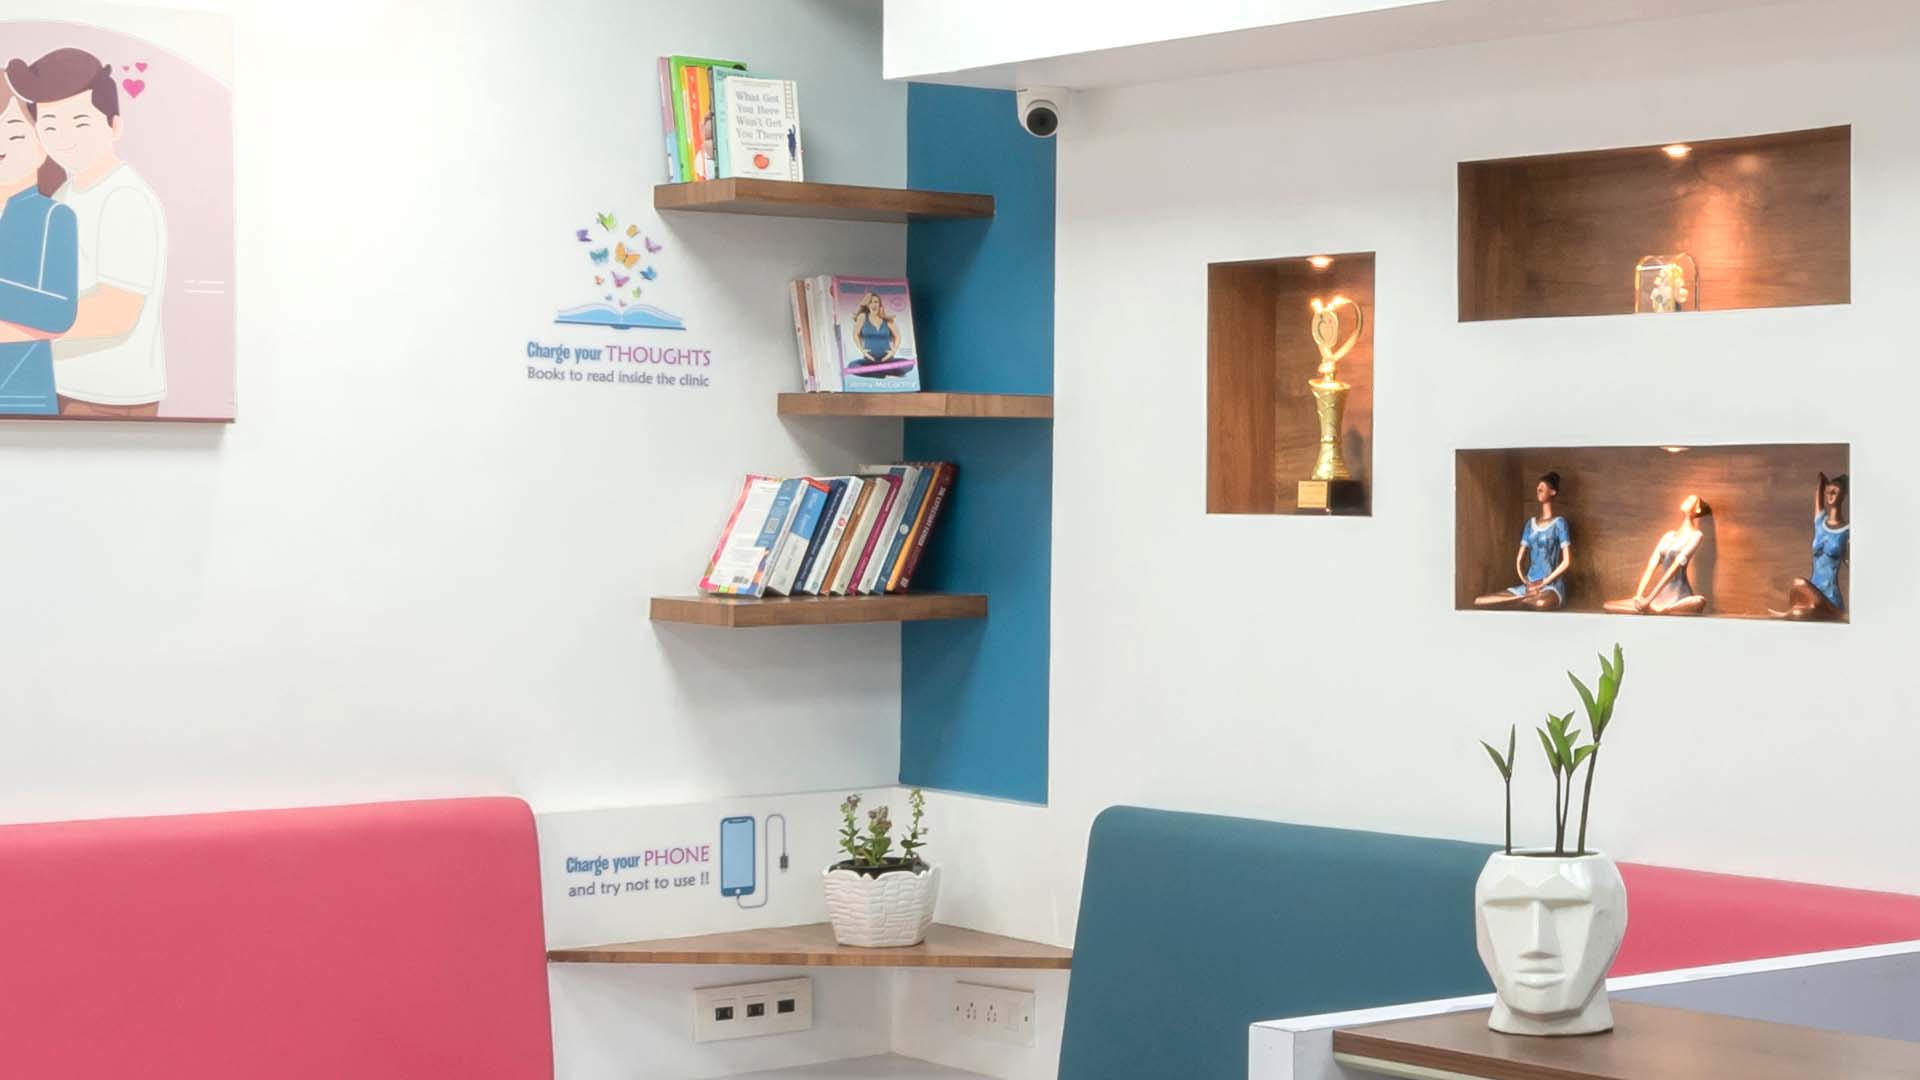 Book library at Dr. Varshali's Gynecology Clinic